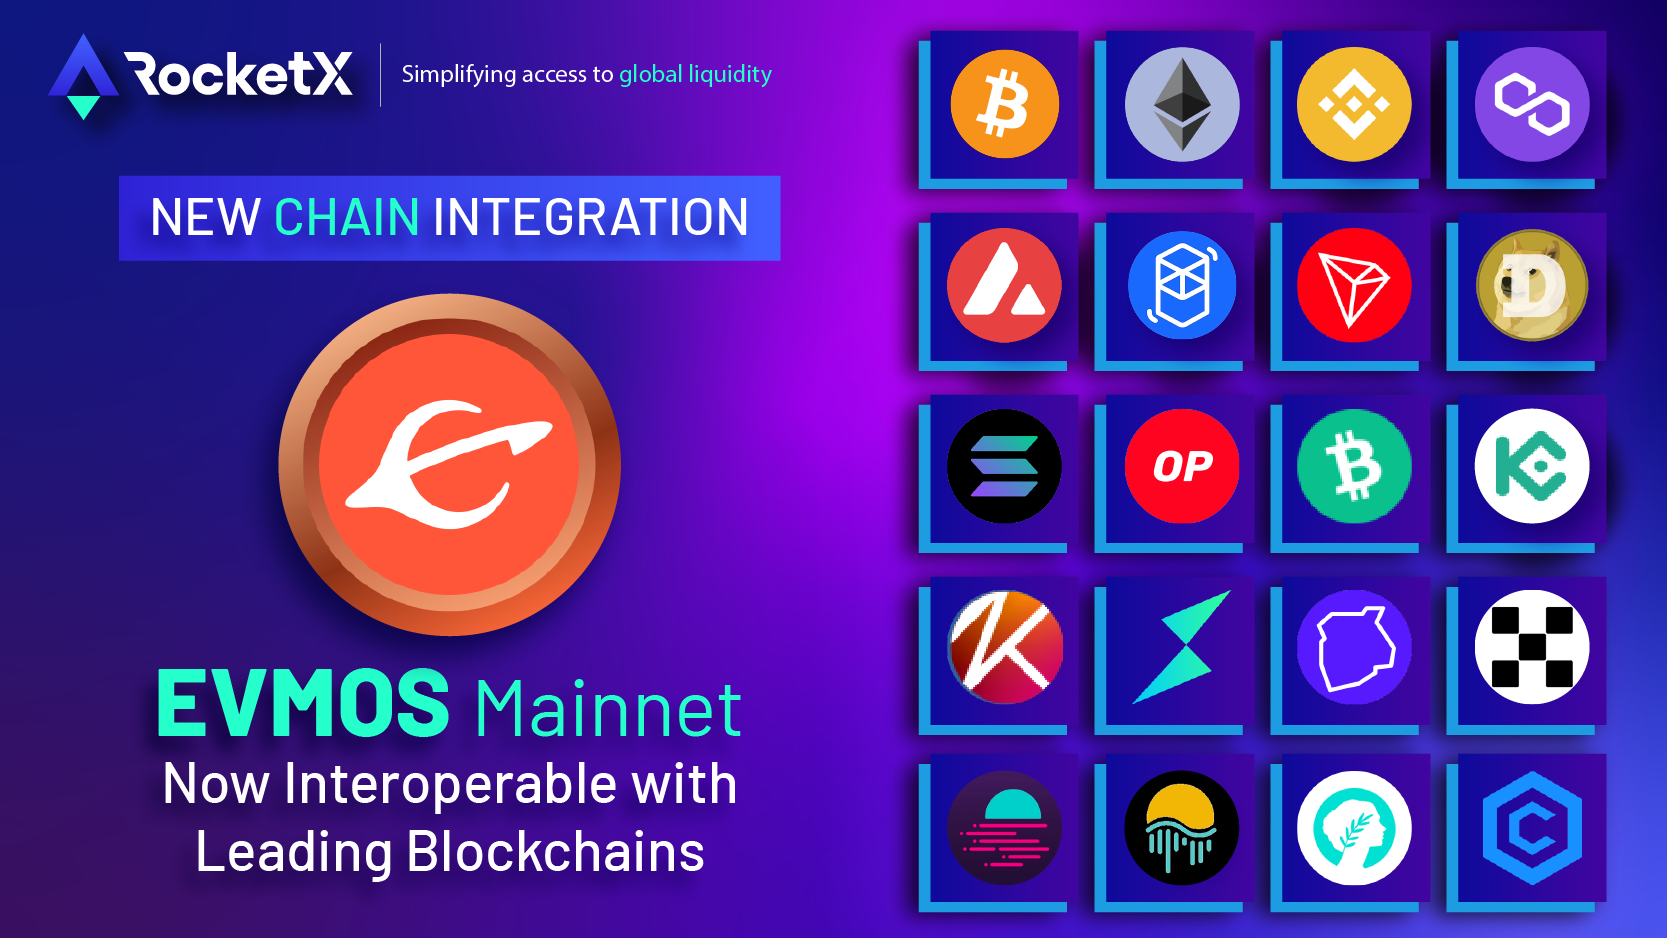 Unleash EVMOS Mainnet Interoperability Via RocketX and Take Control of Your Crypto Assets Today!<br />
